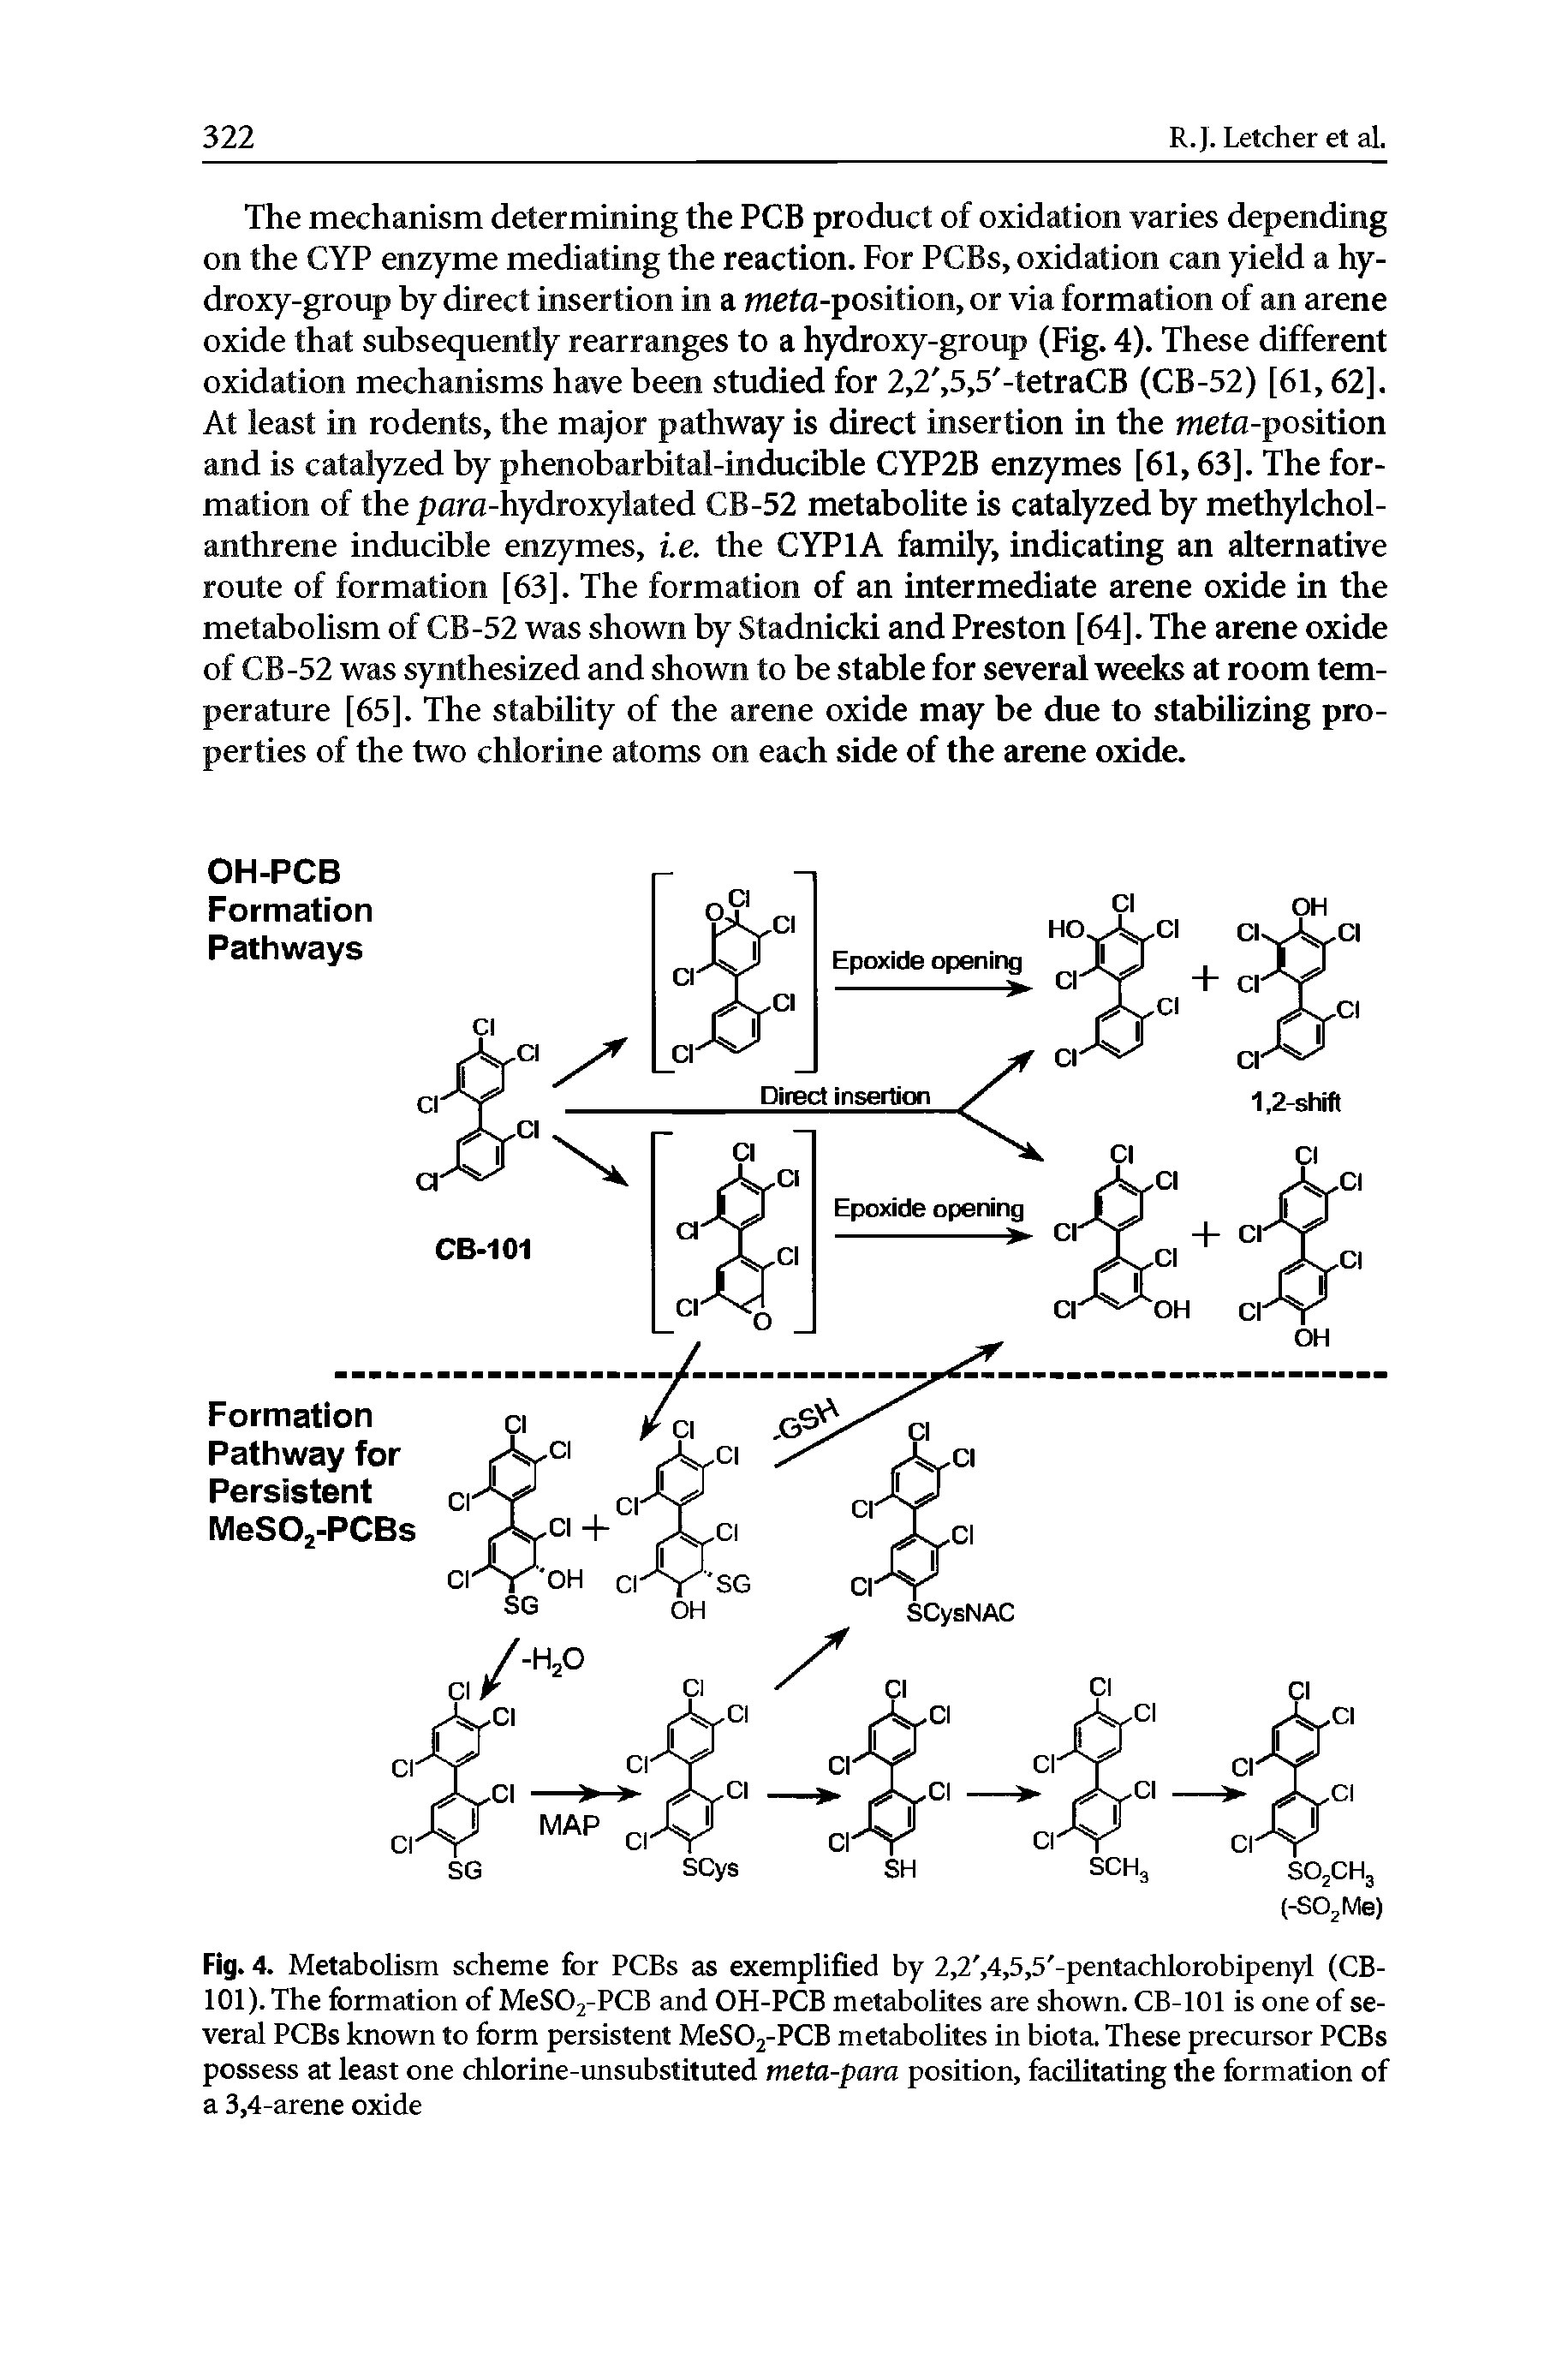 Fig. 4. Metabolism scheme for PCBs as exemplified by 2,2, 4,5,5 -pentachlorobipenyl (CB-101). The formation of MeS02-PCB and OH-PCB metabolites are shown. CB-101 is one of several PCBs known to form persistent MeS02-PCB metabolites in biota. These precursor PCBs possess at least one chlorine-unsubstituted meta-para position, facilitating the formation of a 3,4-arene oxide...